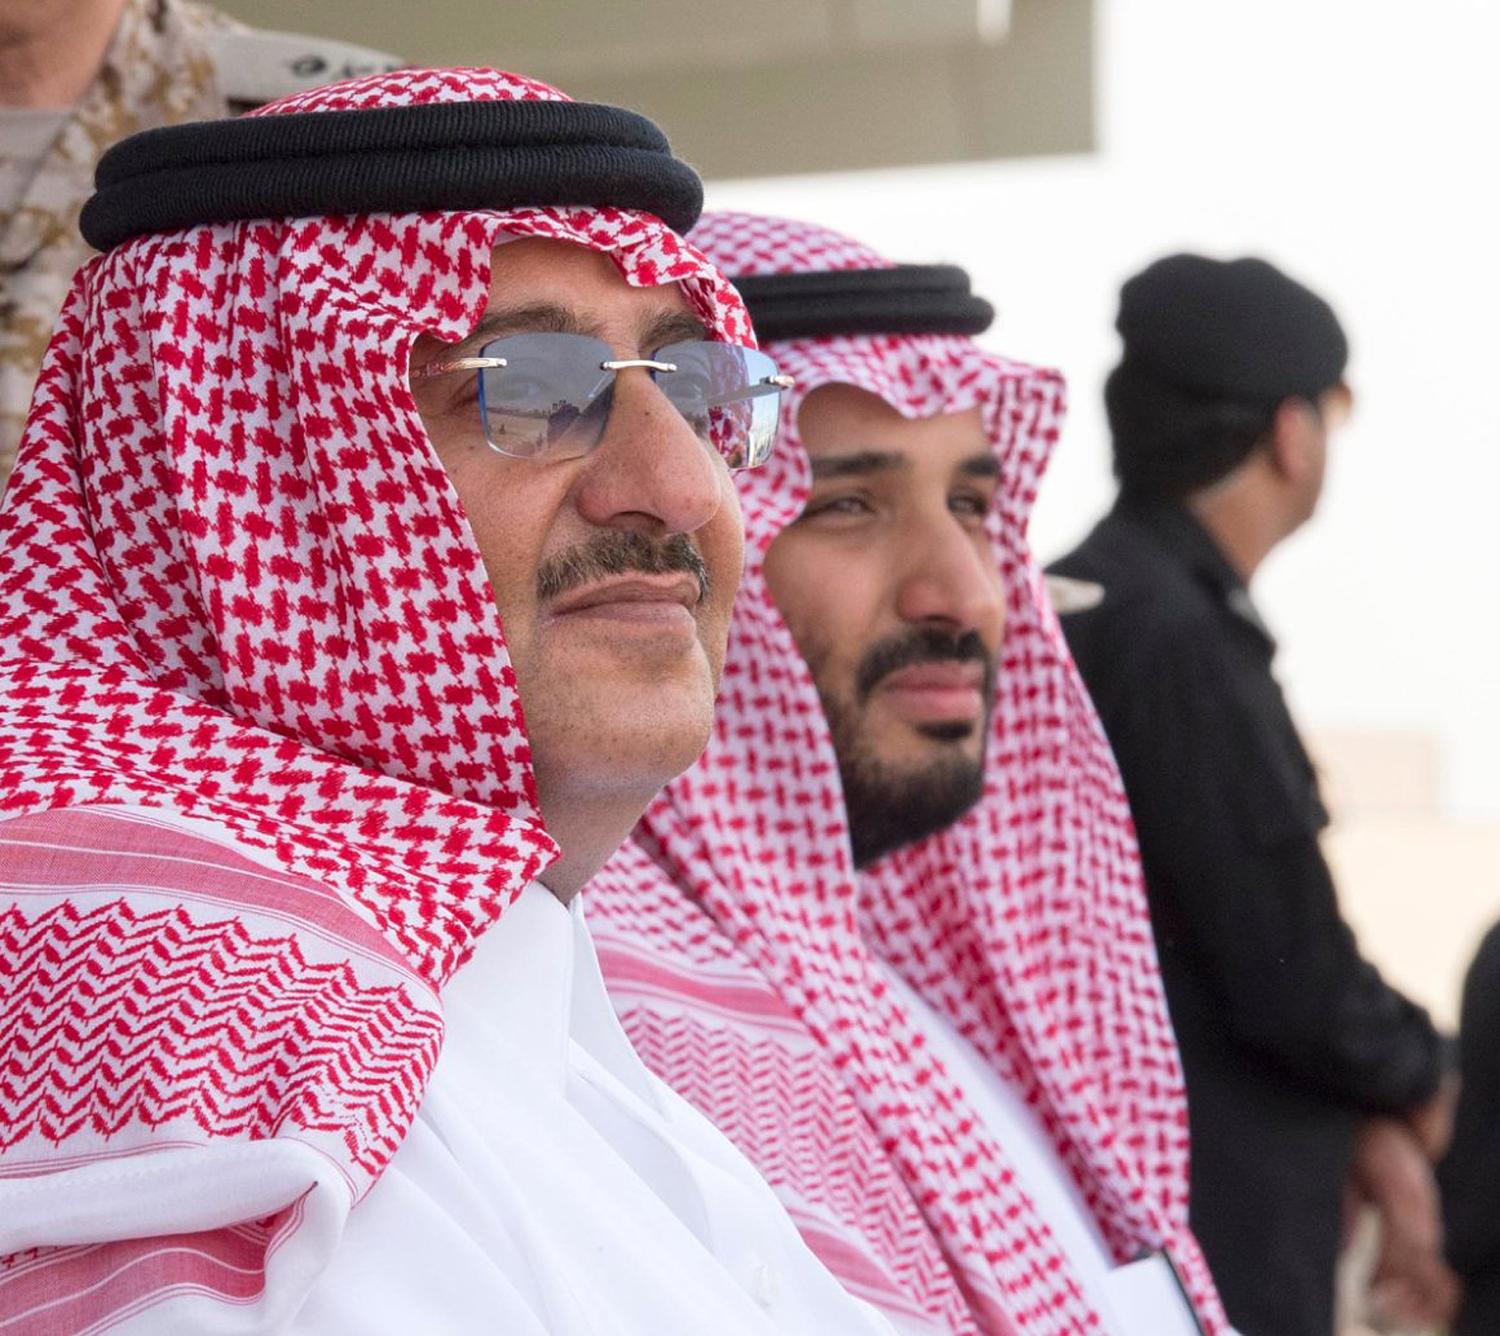 File photo dated March 11, 2016 of L-R : Saudi Crown Prince Mohammed Bin Nayef and his cousin Defense Minister Mohammed Bin Salman Al Saud attend military drill "Northern Thunder" in Hafr Al Batin area, north of Saudi Arabia. A new Saudi anti-corruption body has detained 11 princes, four sitting ministers and dozens of former ministers, media reports say. The detentions came hours after the new committee, headed by Crown Prince Mohammed bin Salman, was formed by royal decree. Photo by Balkis Press/ABACAPRESS.COMNo Use World rights.